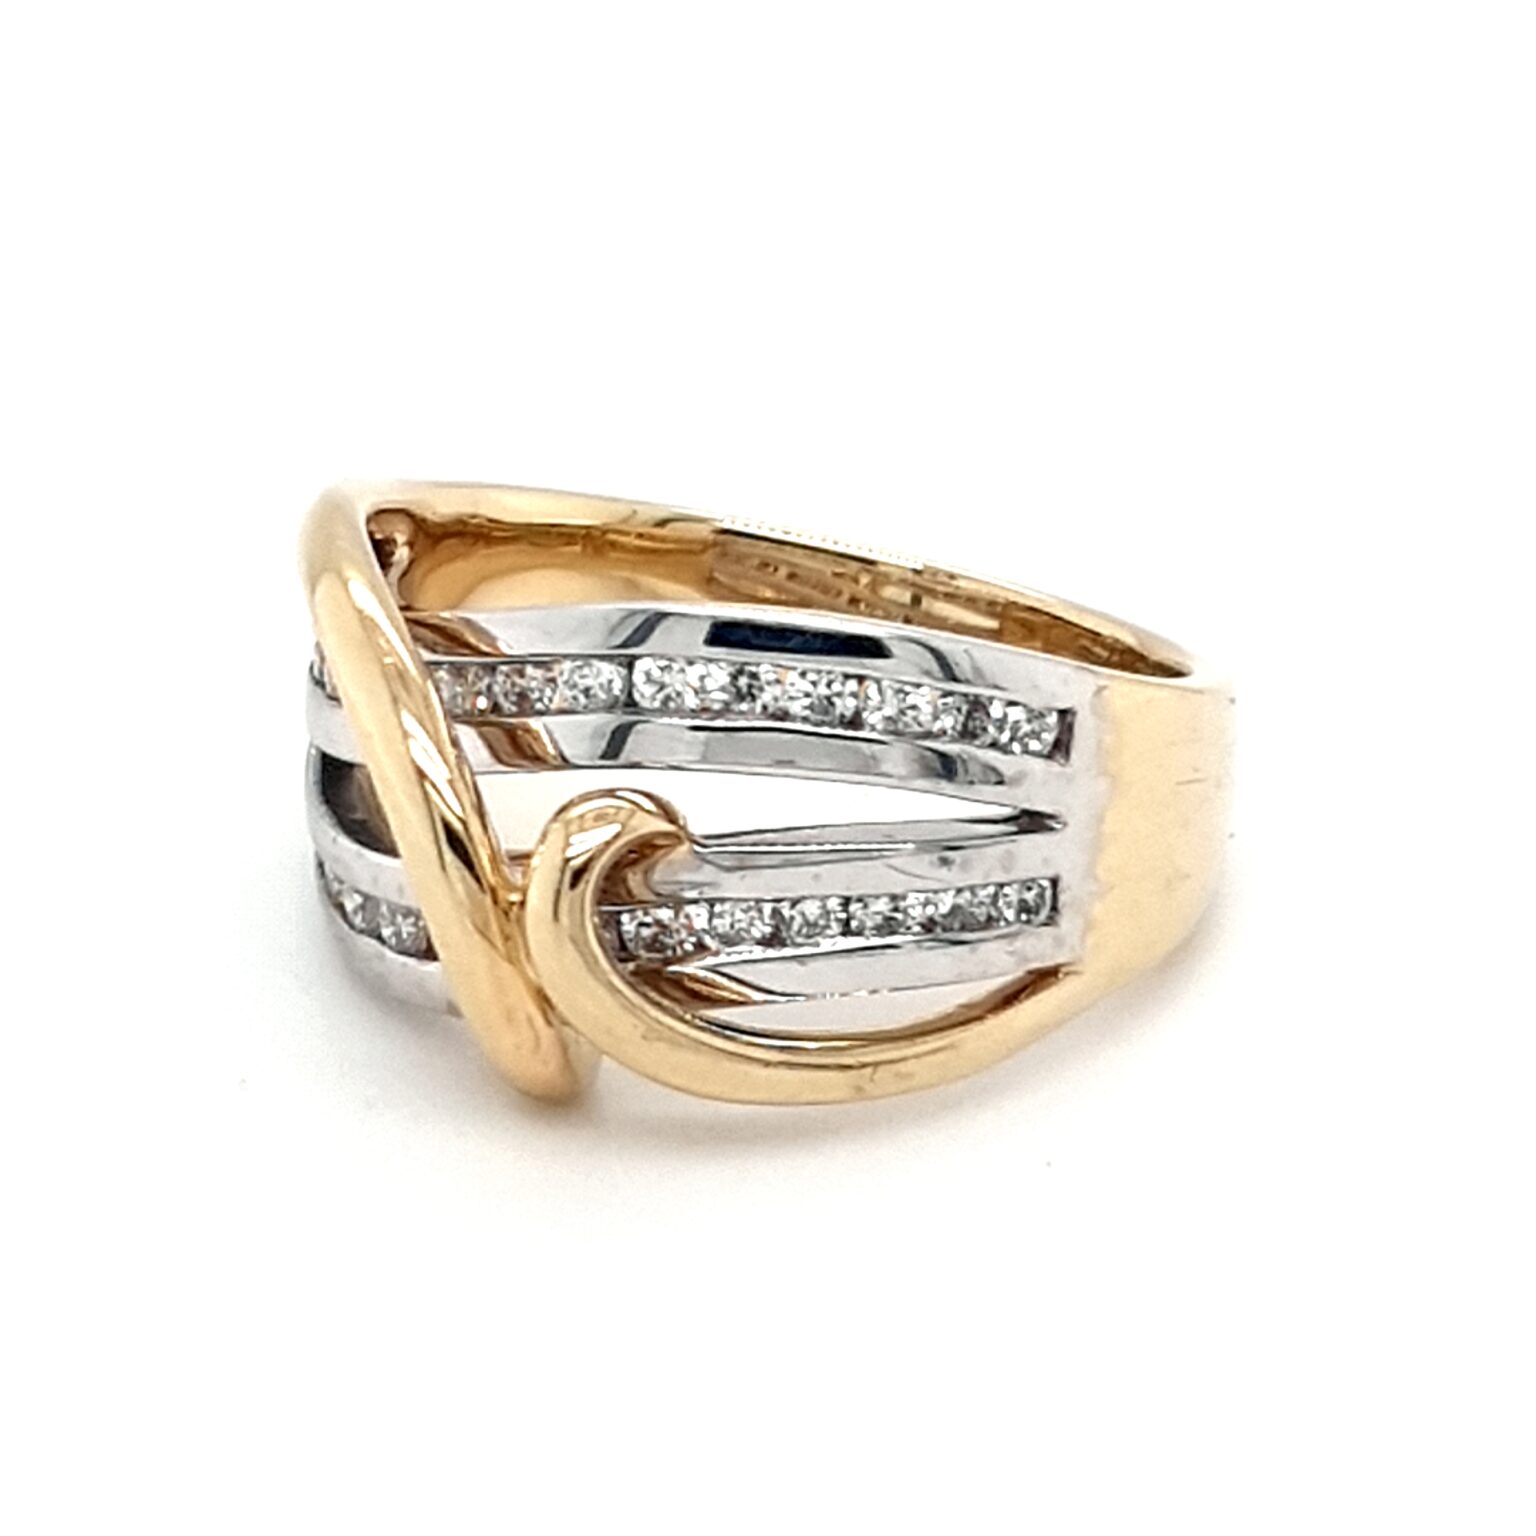 Leon Bakers 18K Yellow and White Gold Diamond Dress Ring_1